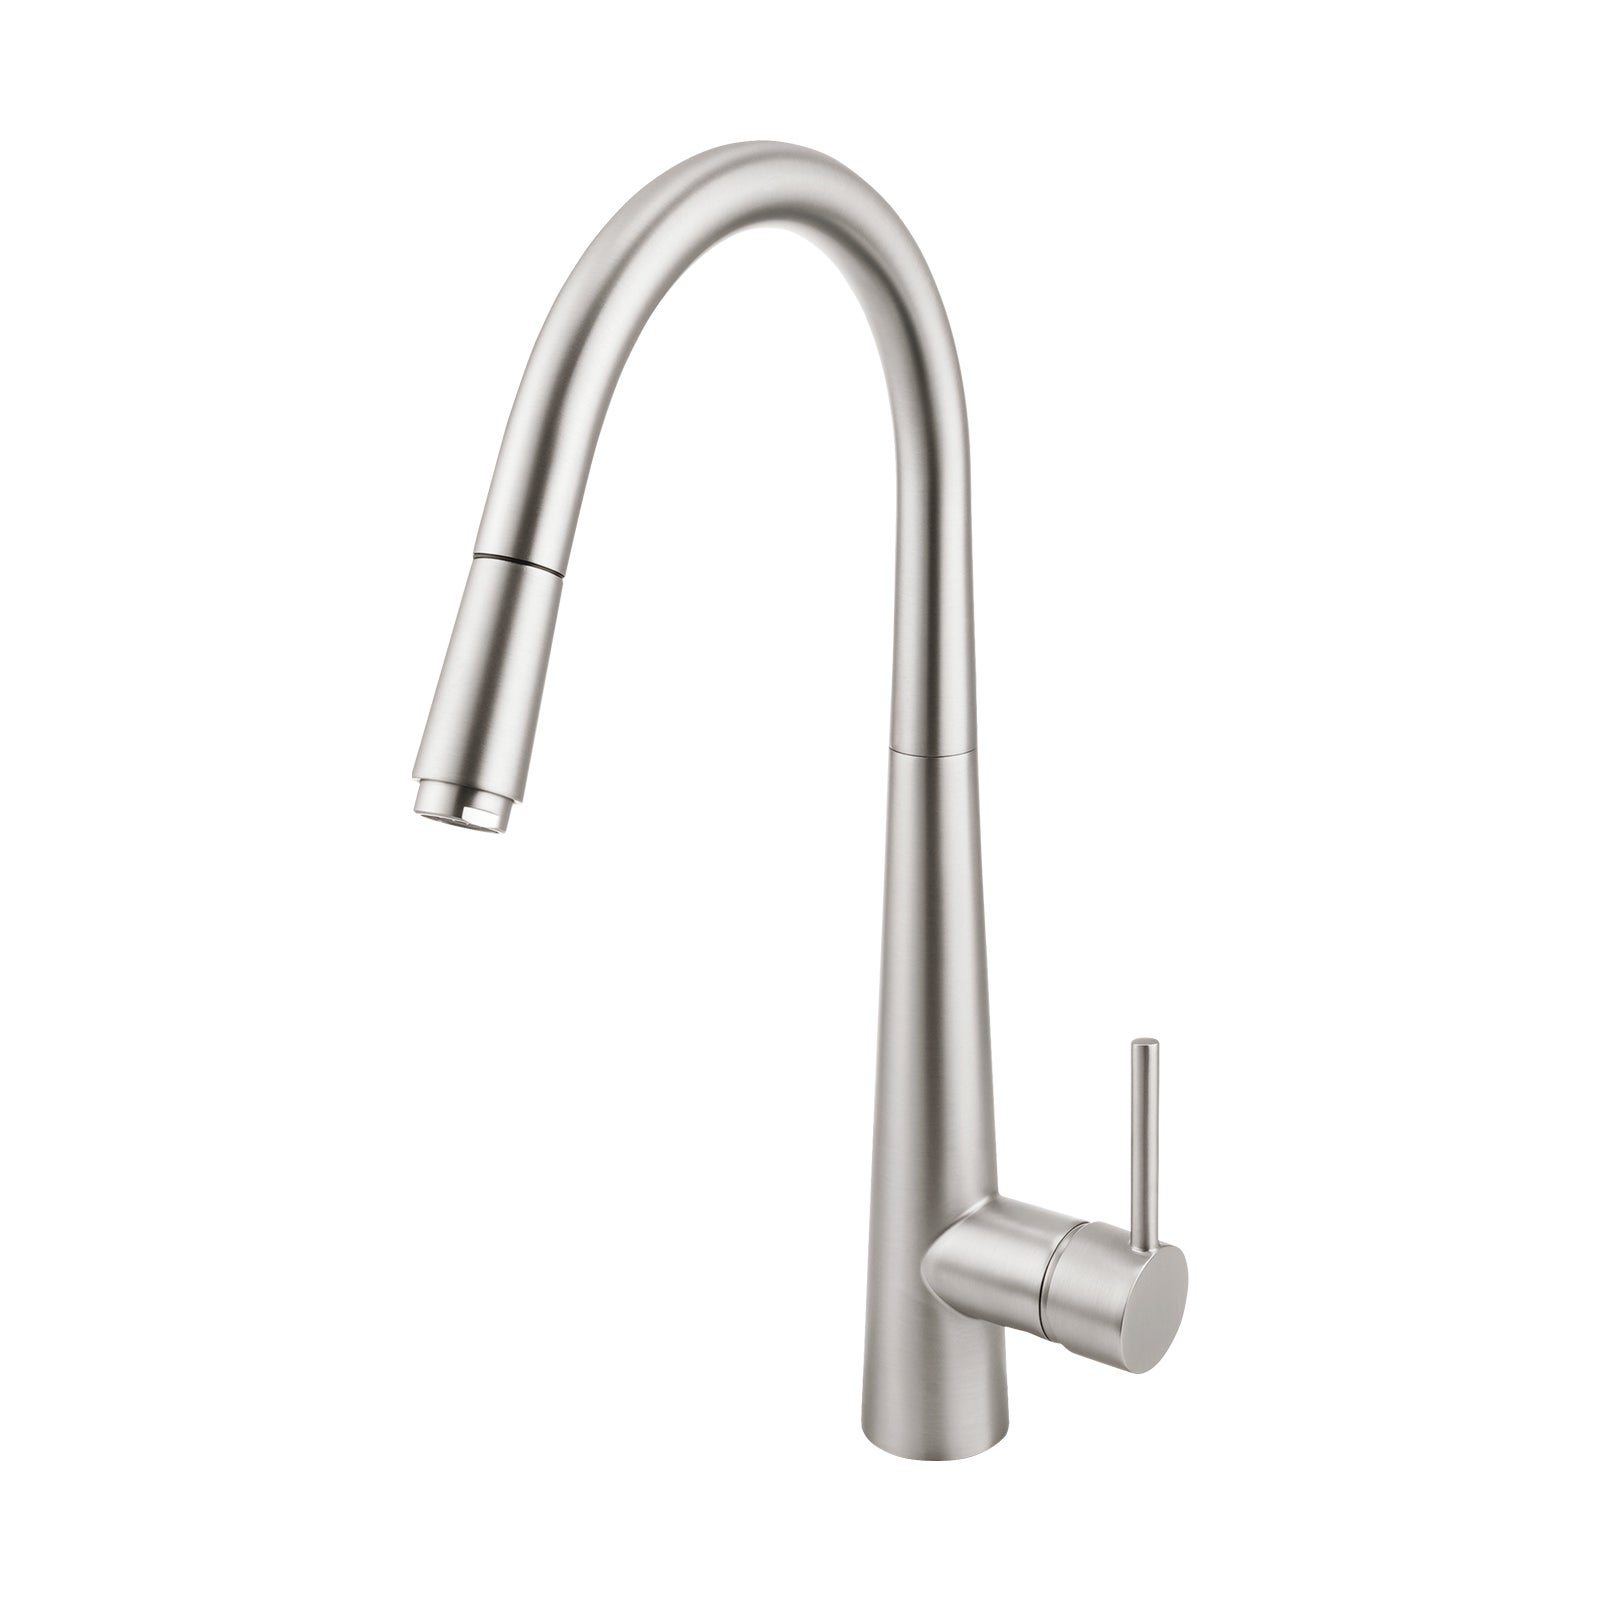 ACA 360 degree Swivel Pull Out Kitchen Mixer Tap Brushed Nickel Brass Body Lead Free